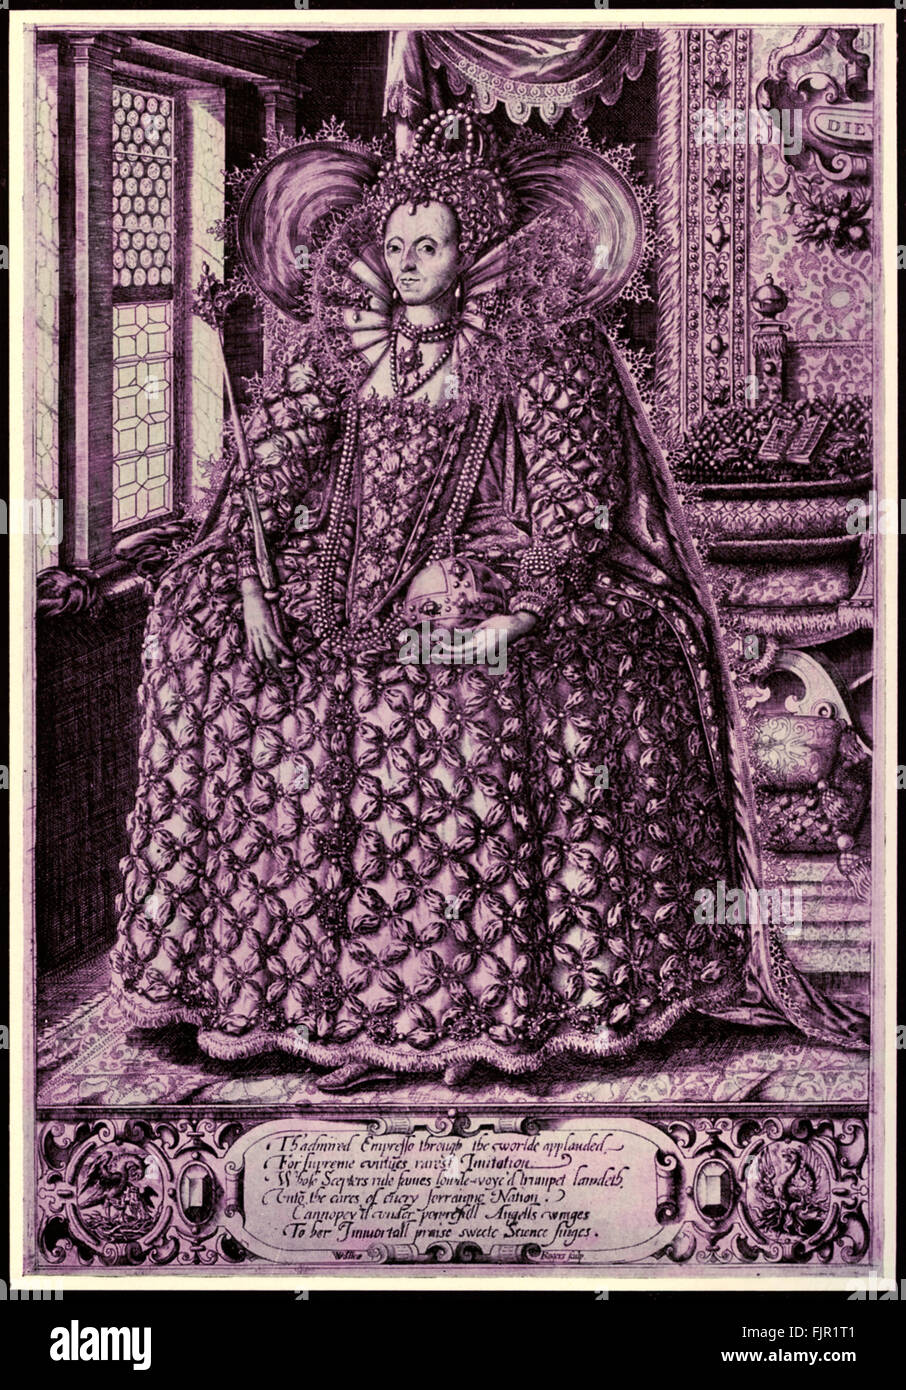 Queen Elizabeth I (1533-1603), after a 1588 engraving by William Rogers (1545-1604). Elizabeth is depicted in full regalia following her recent victory over the Spanish Armada. Herbert Norris artist  died 1950 - may require copyright clearance Stock Photo